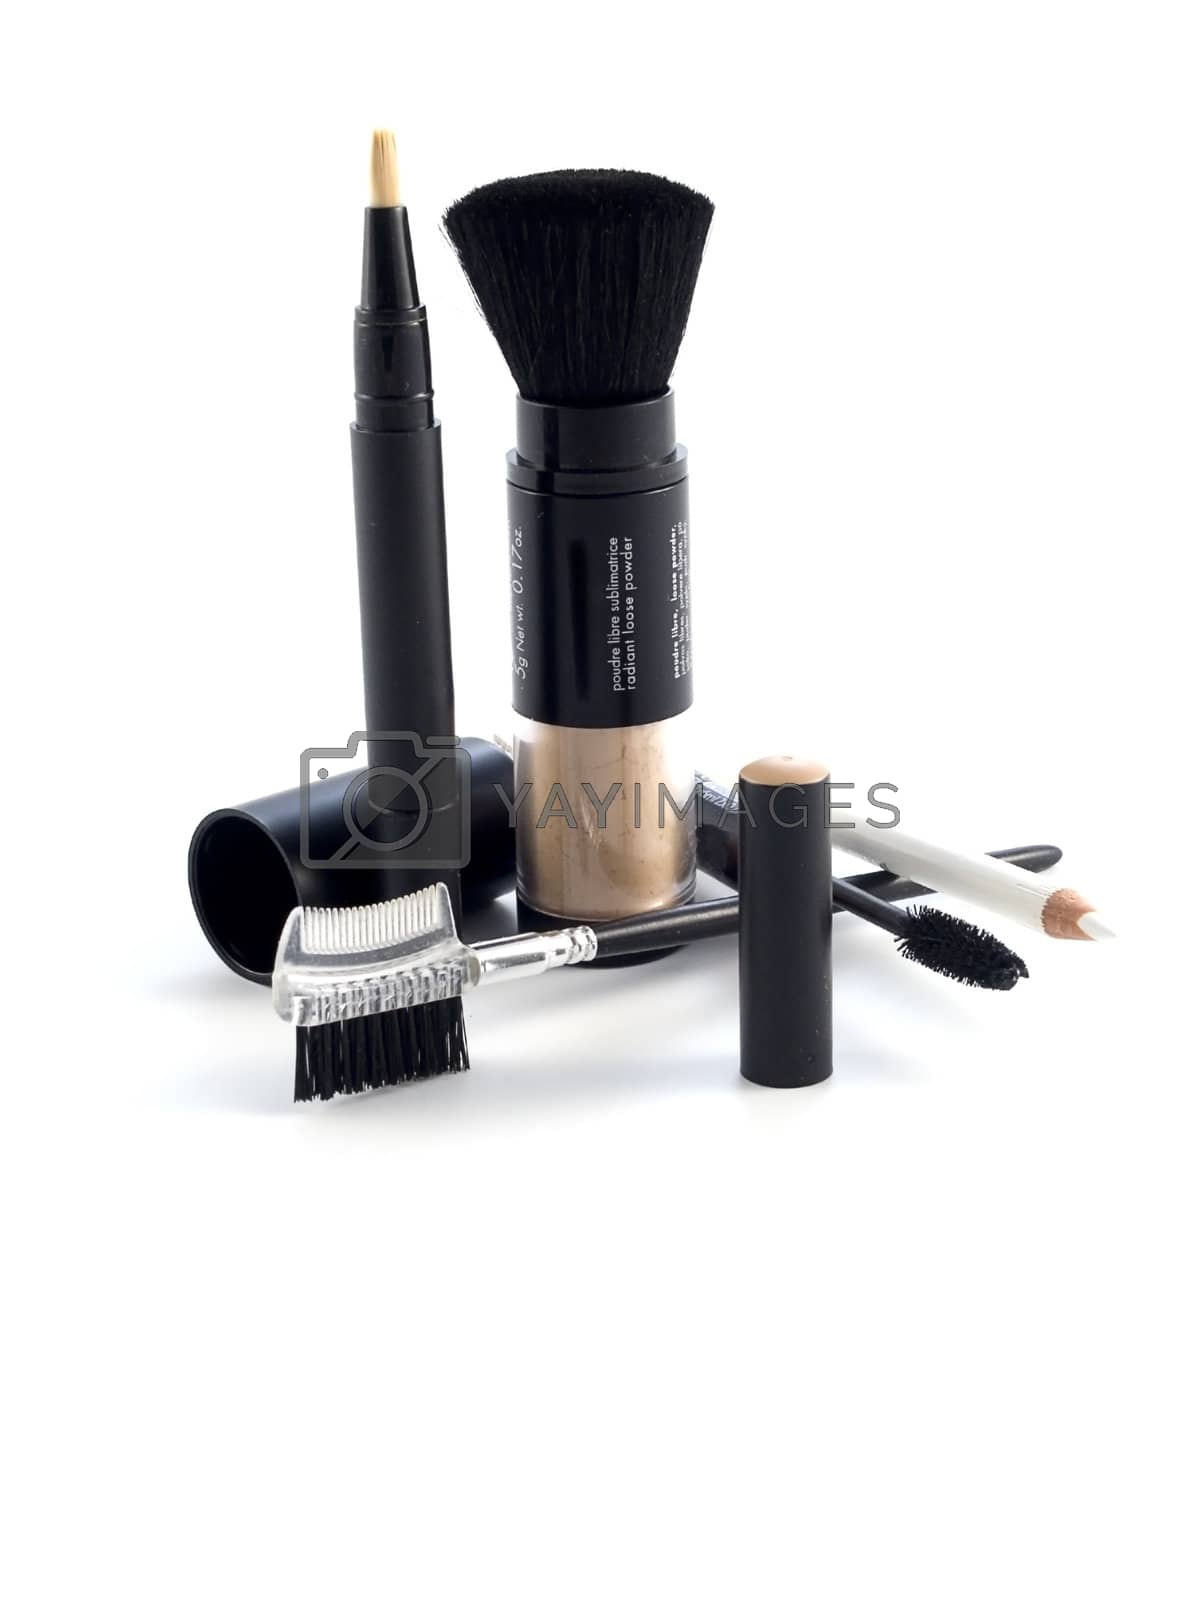 Royalty free image of face cosmetics by iwka